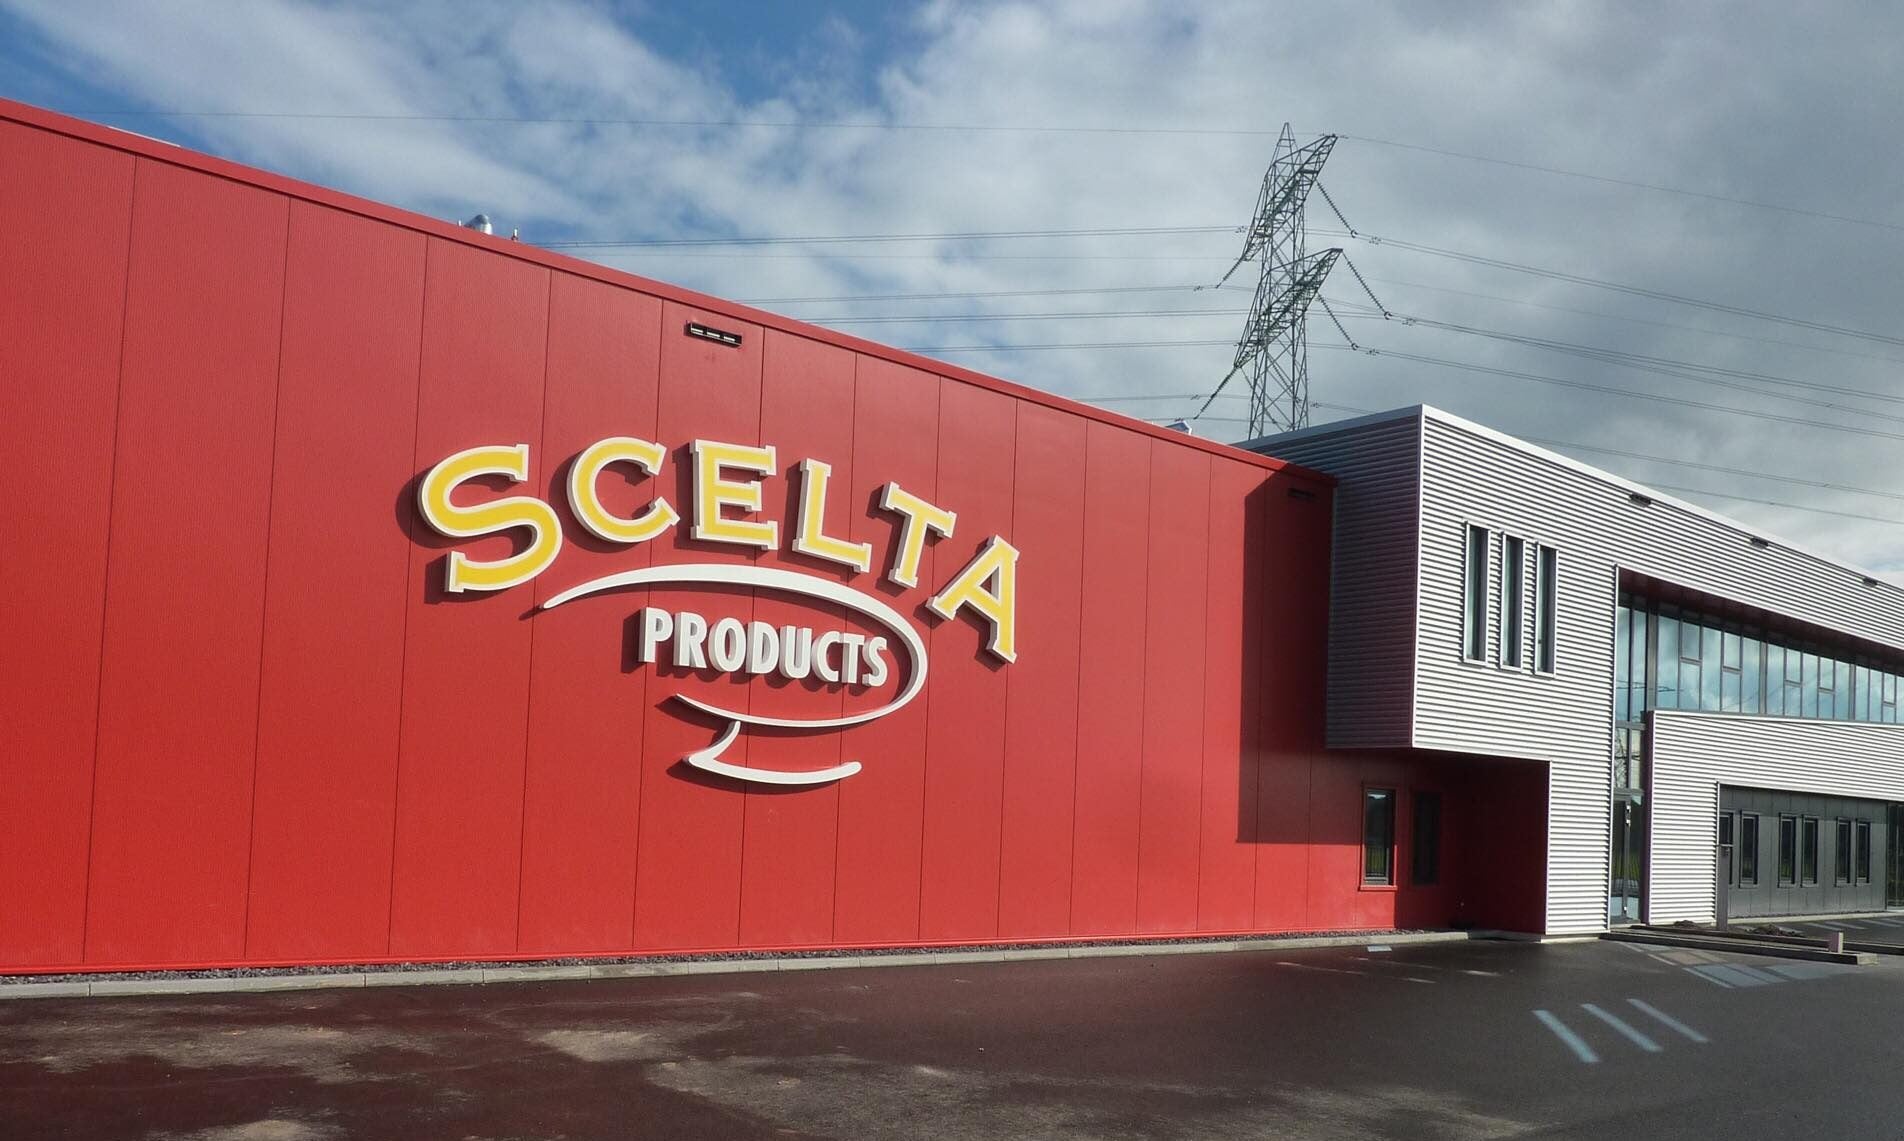 McCain Foods builds Netherlands base with Scelta Products acquisition